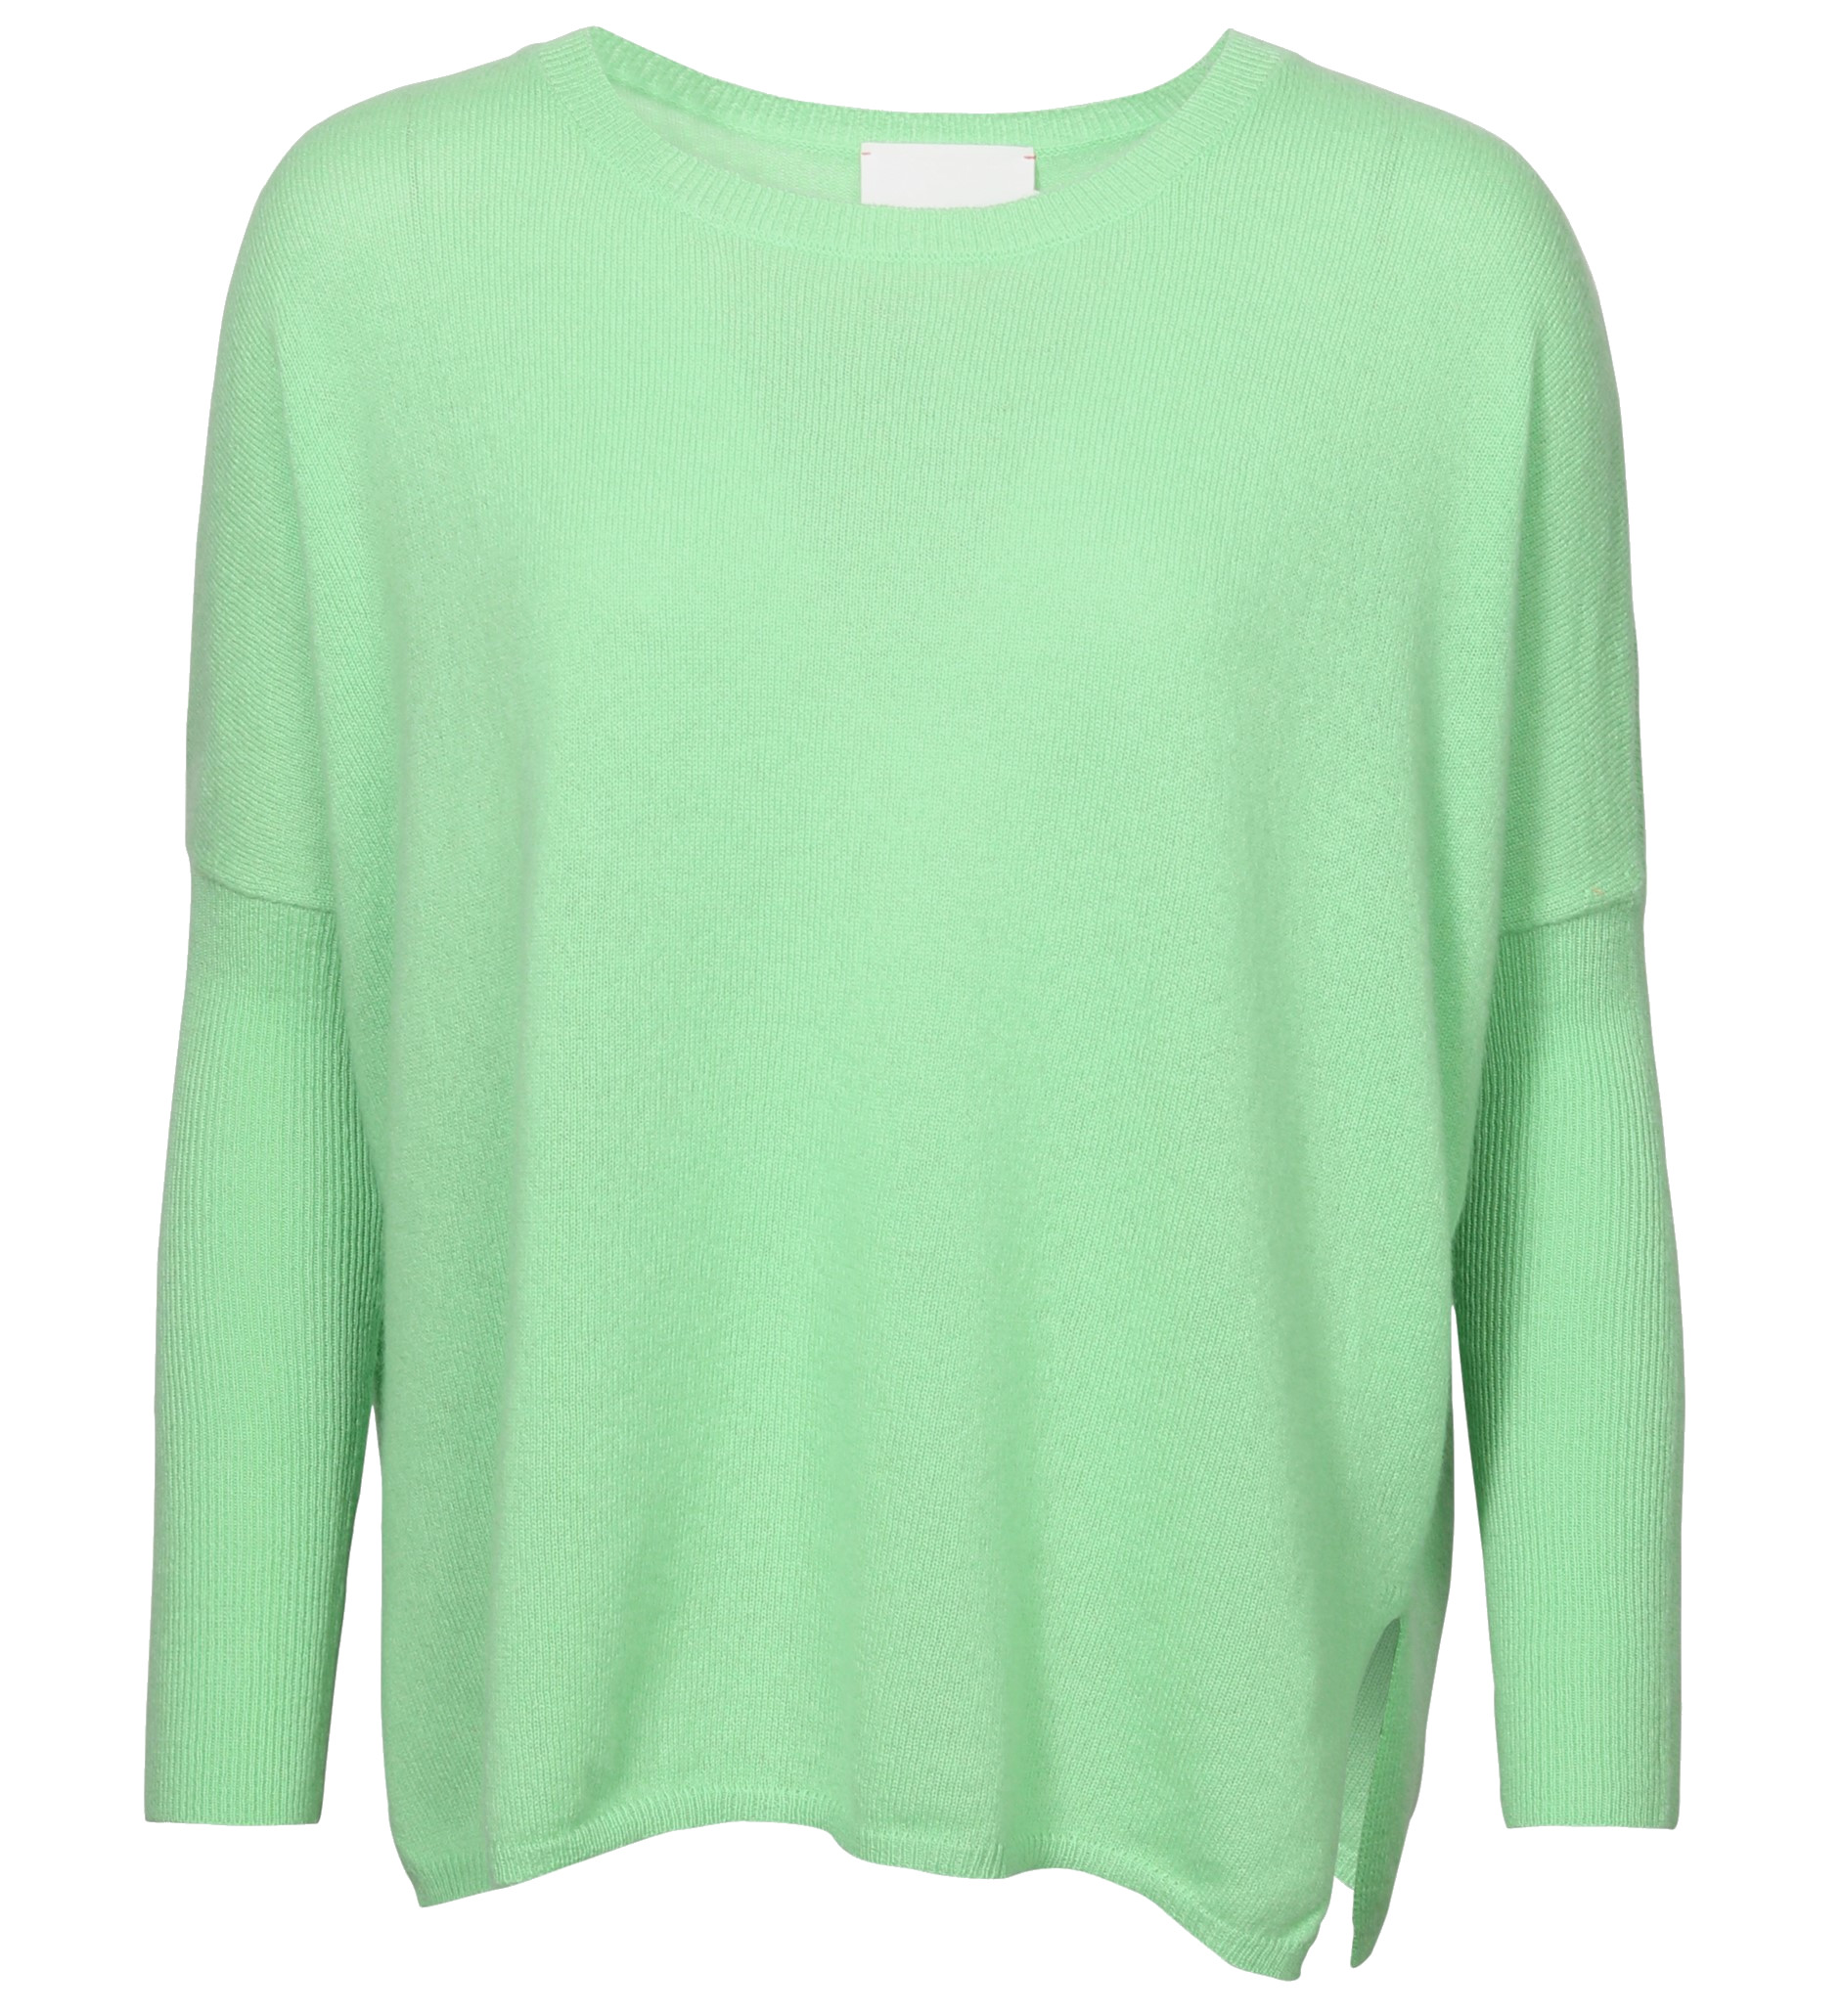 ABSOLUT CASHMERE Poncho Sweater in Light Green M